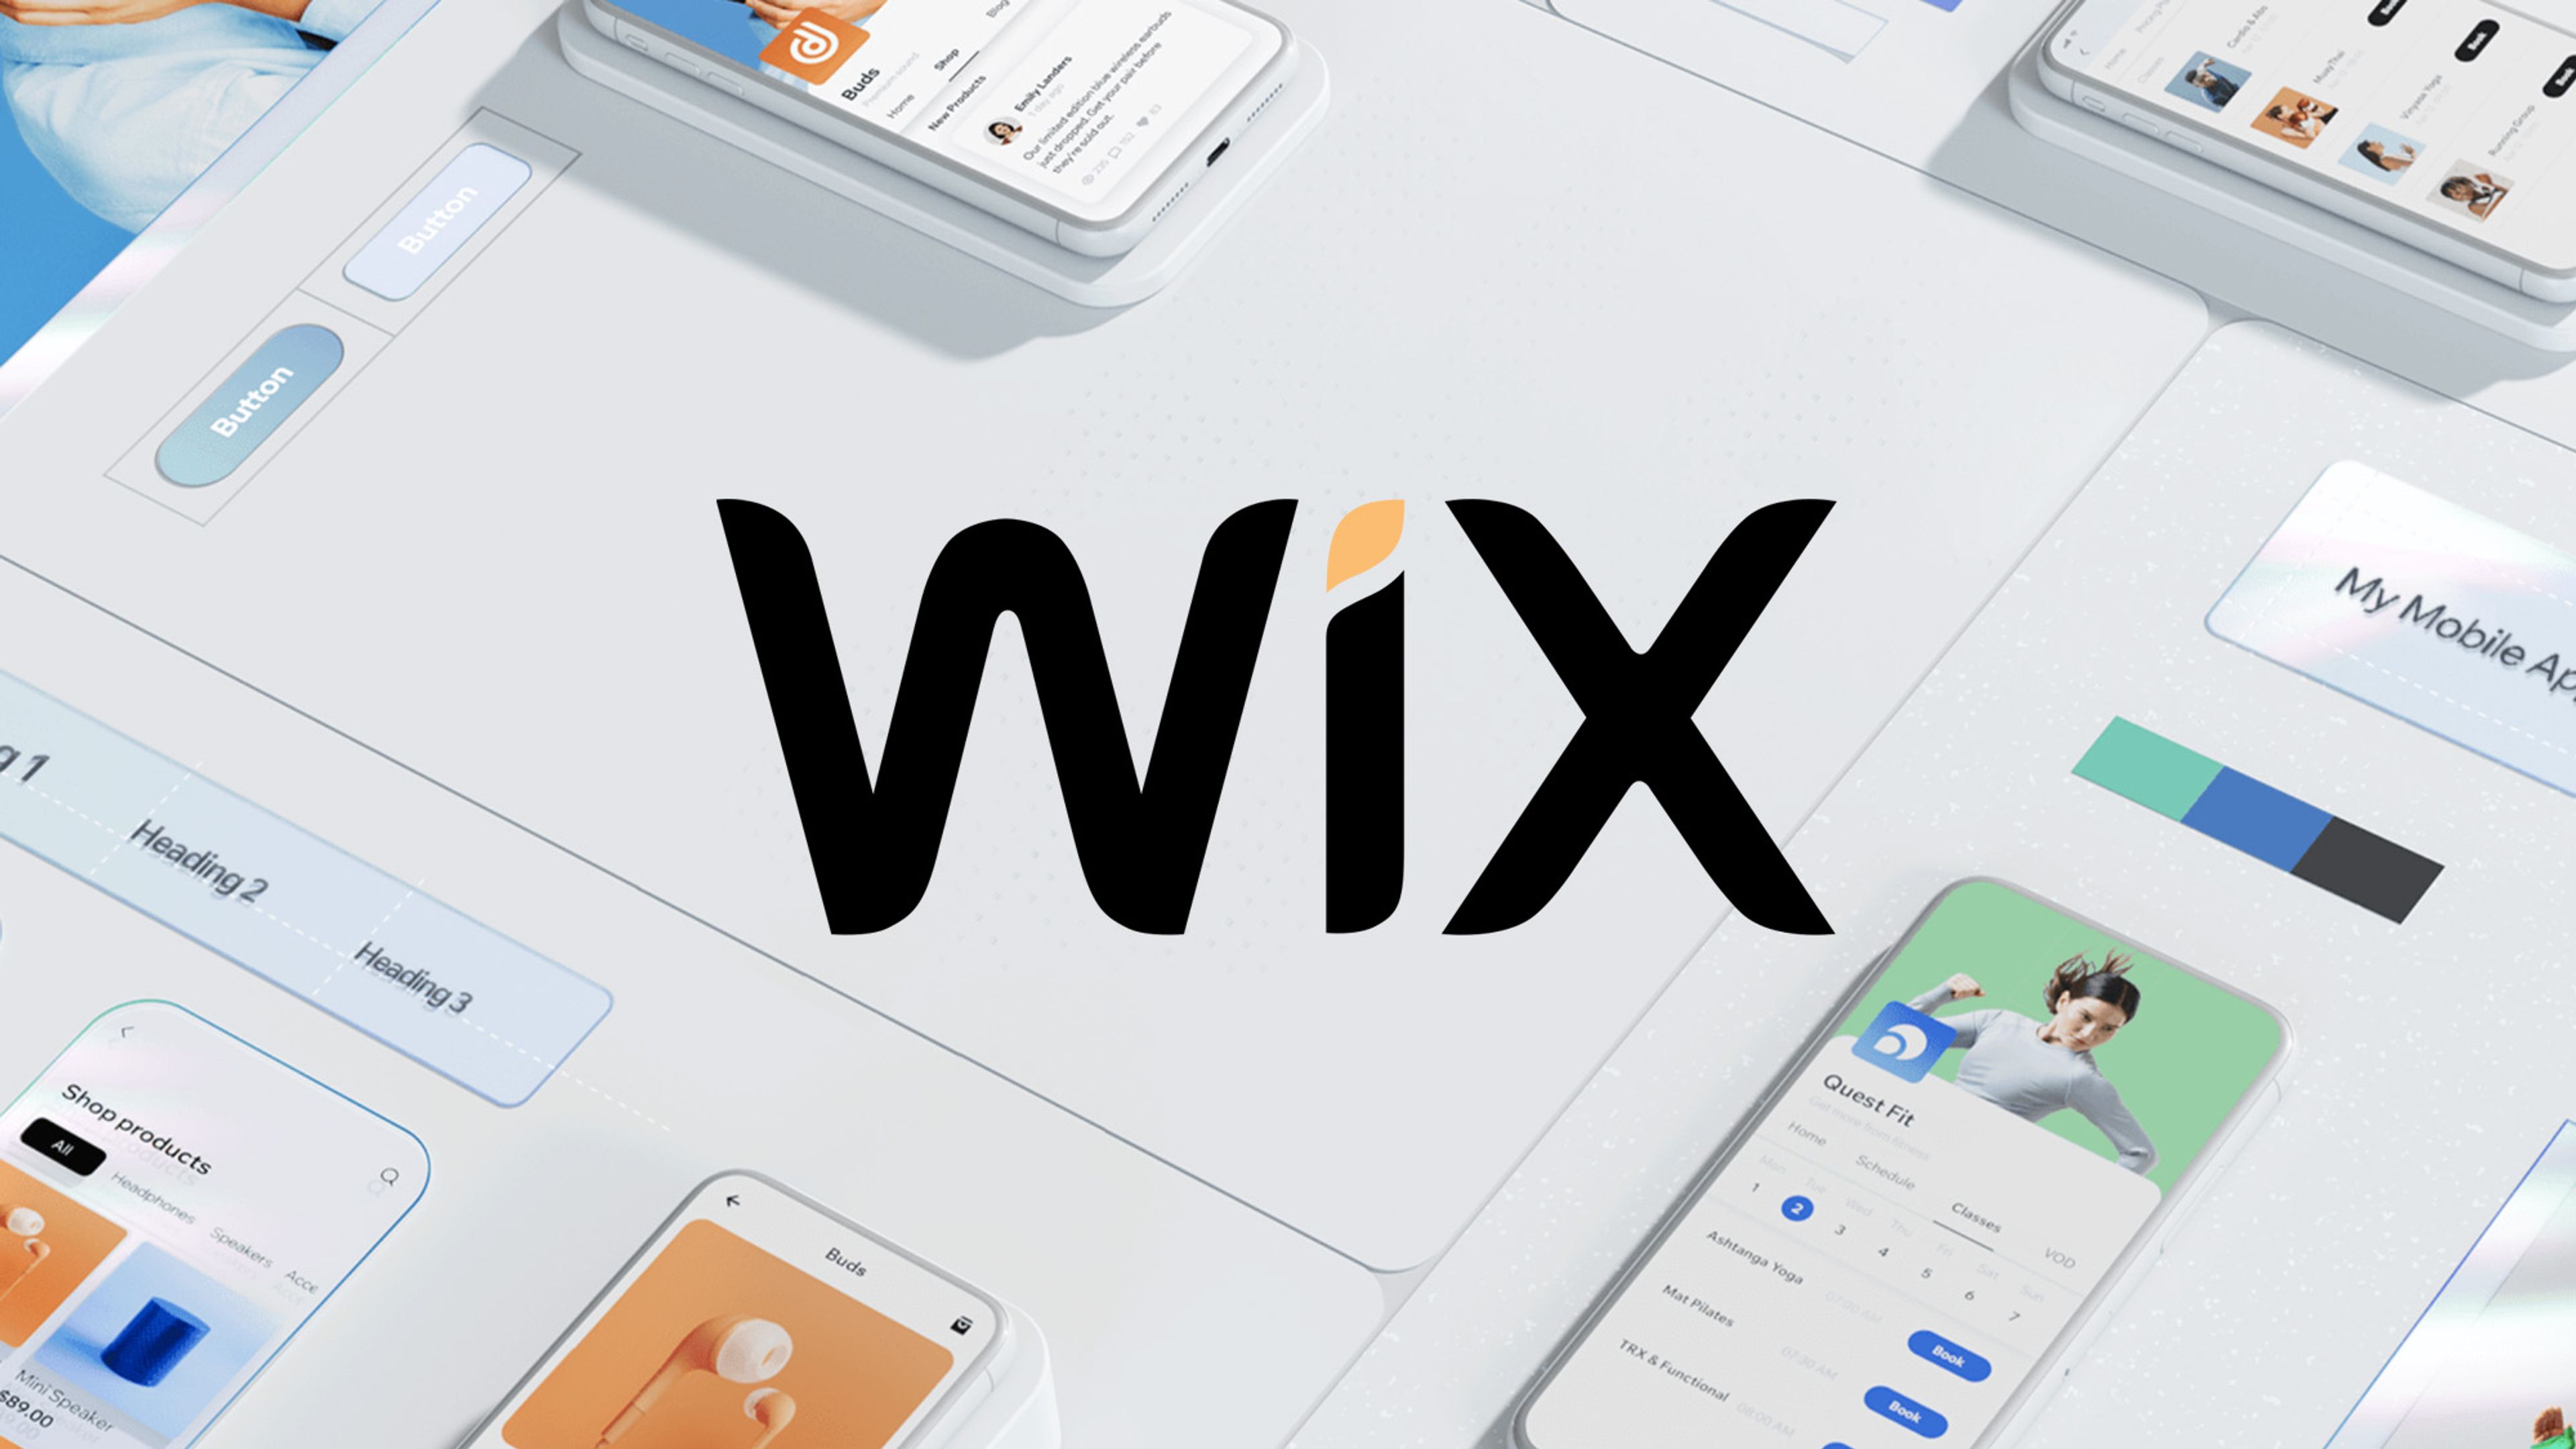 Branded App by Wix image with logo